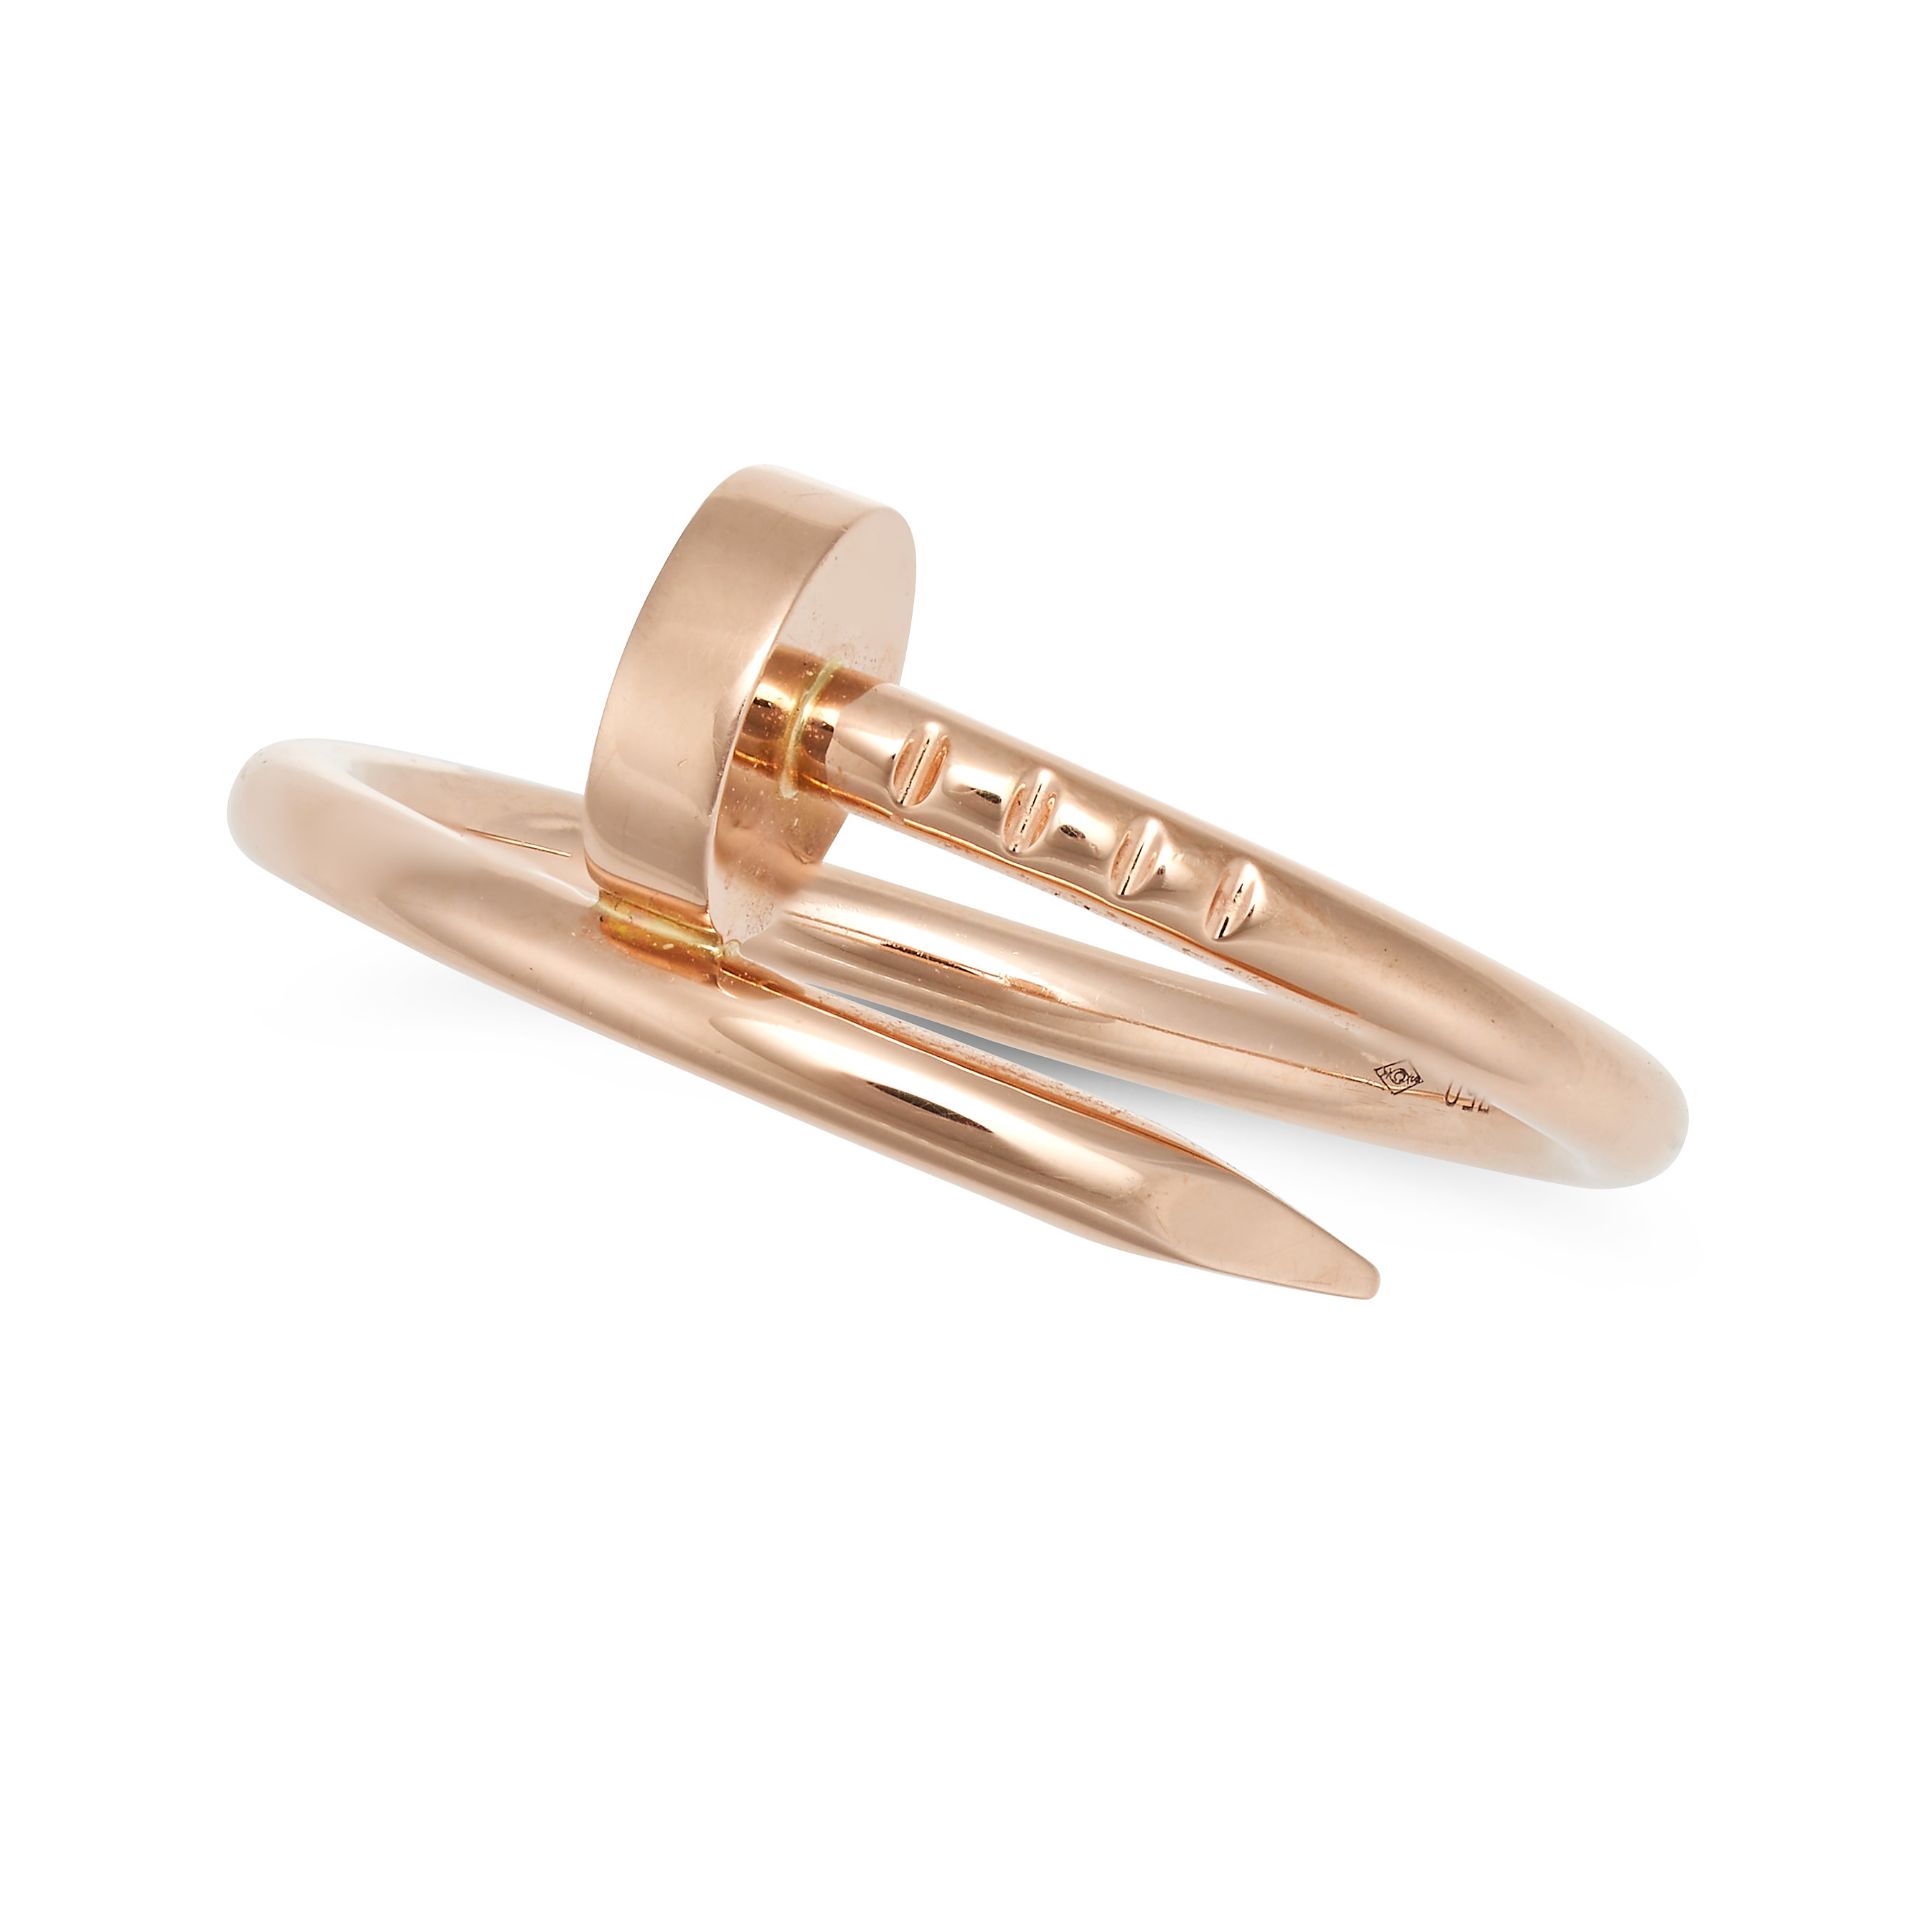 CARTIER, A JUSTE UN CLOU RING in 18ct rose gold, designed as a twisted nail, signed Cartier and n...